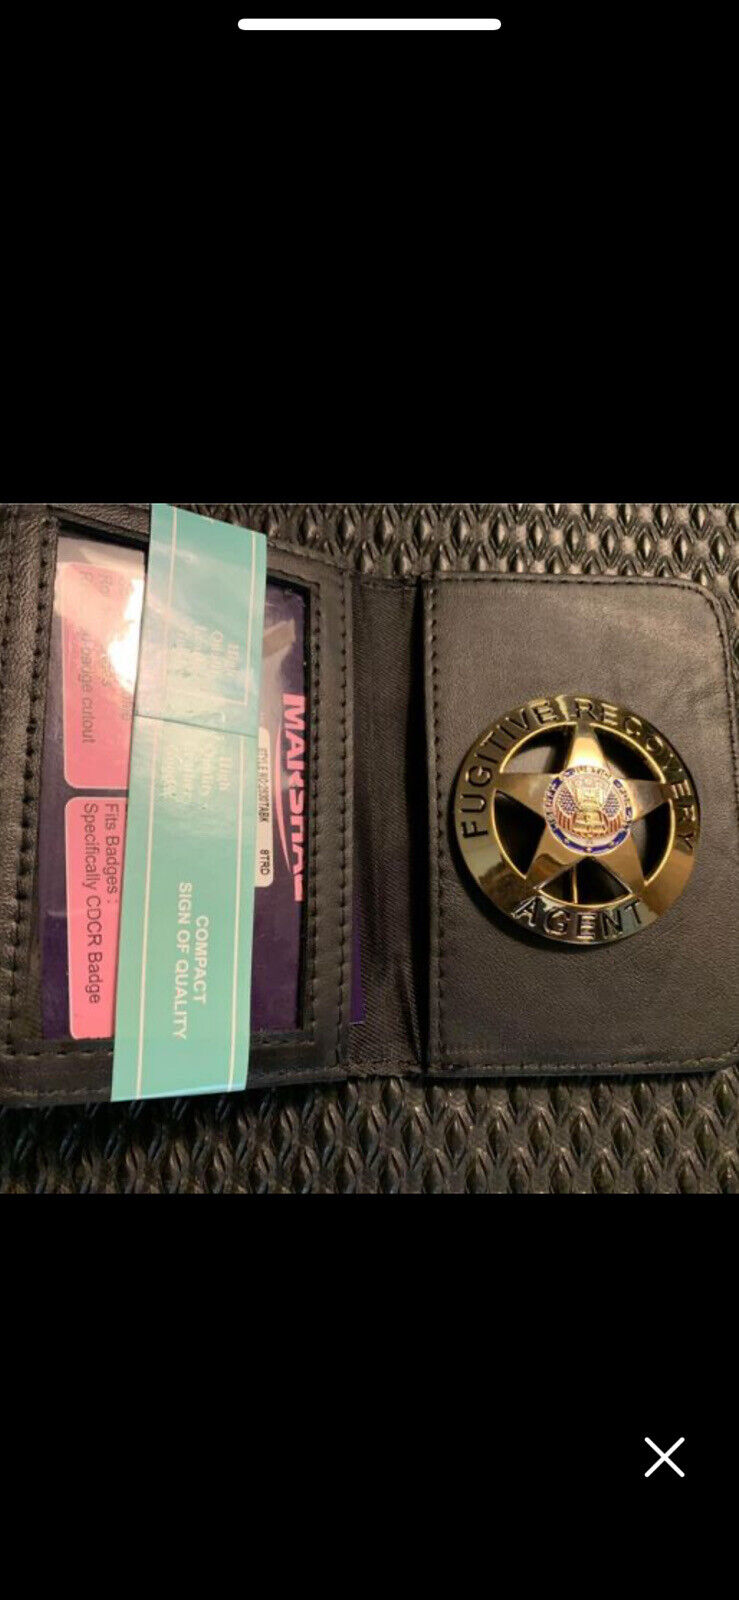 Fugitive Recovery Agent Badge W/Wallet Dog The Bounty Hunter For Collecting Only